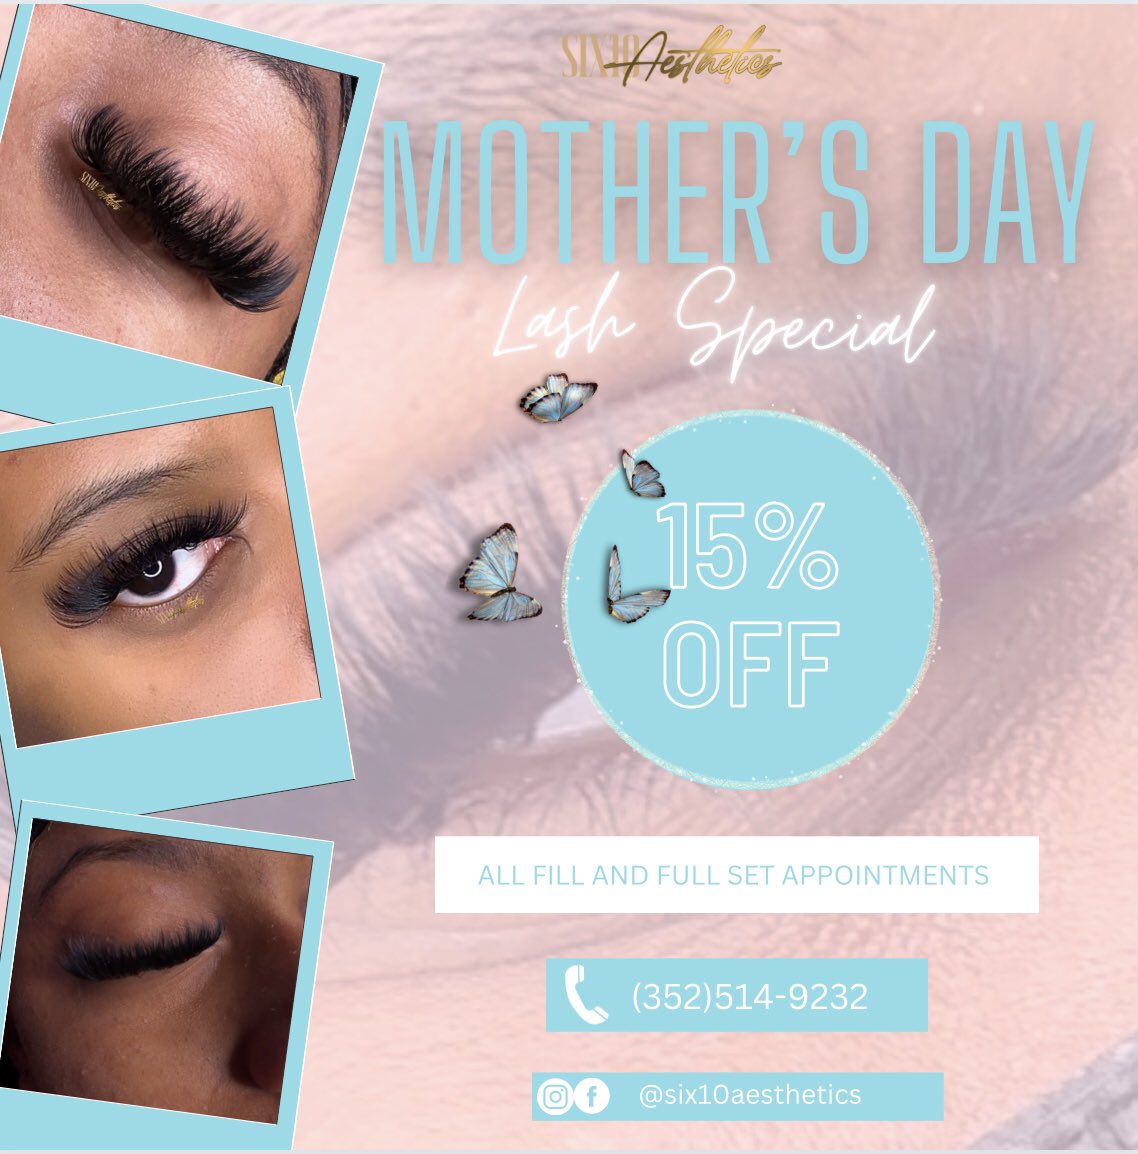 Treat yourself (or your mom!) to a lash makeover this Mother's Day season. 💁🏽‍♀️ Book with Six10 Aesthetics between May 1st and May 20th to receive 15% off your services. 

Gift certificates are also available but are not included in the sale. 🌹